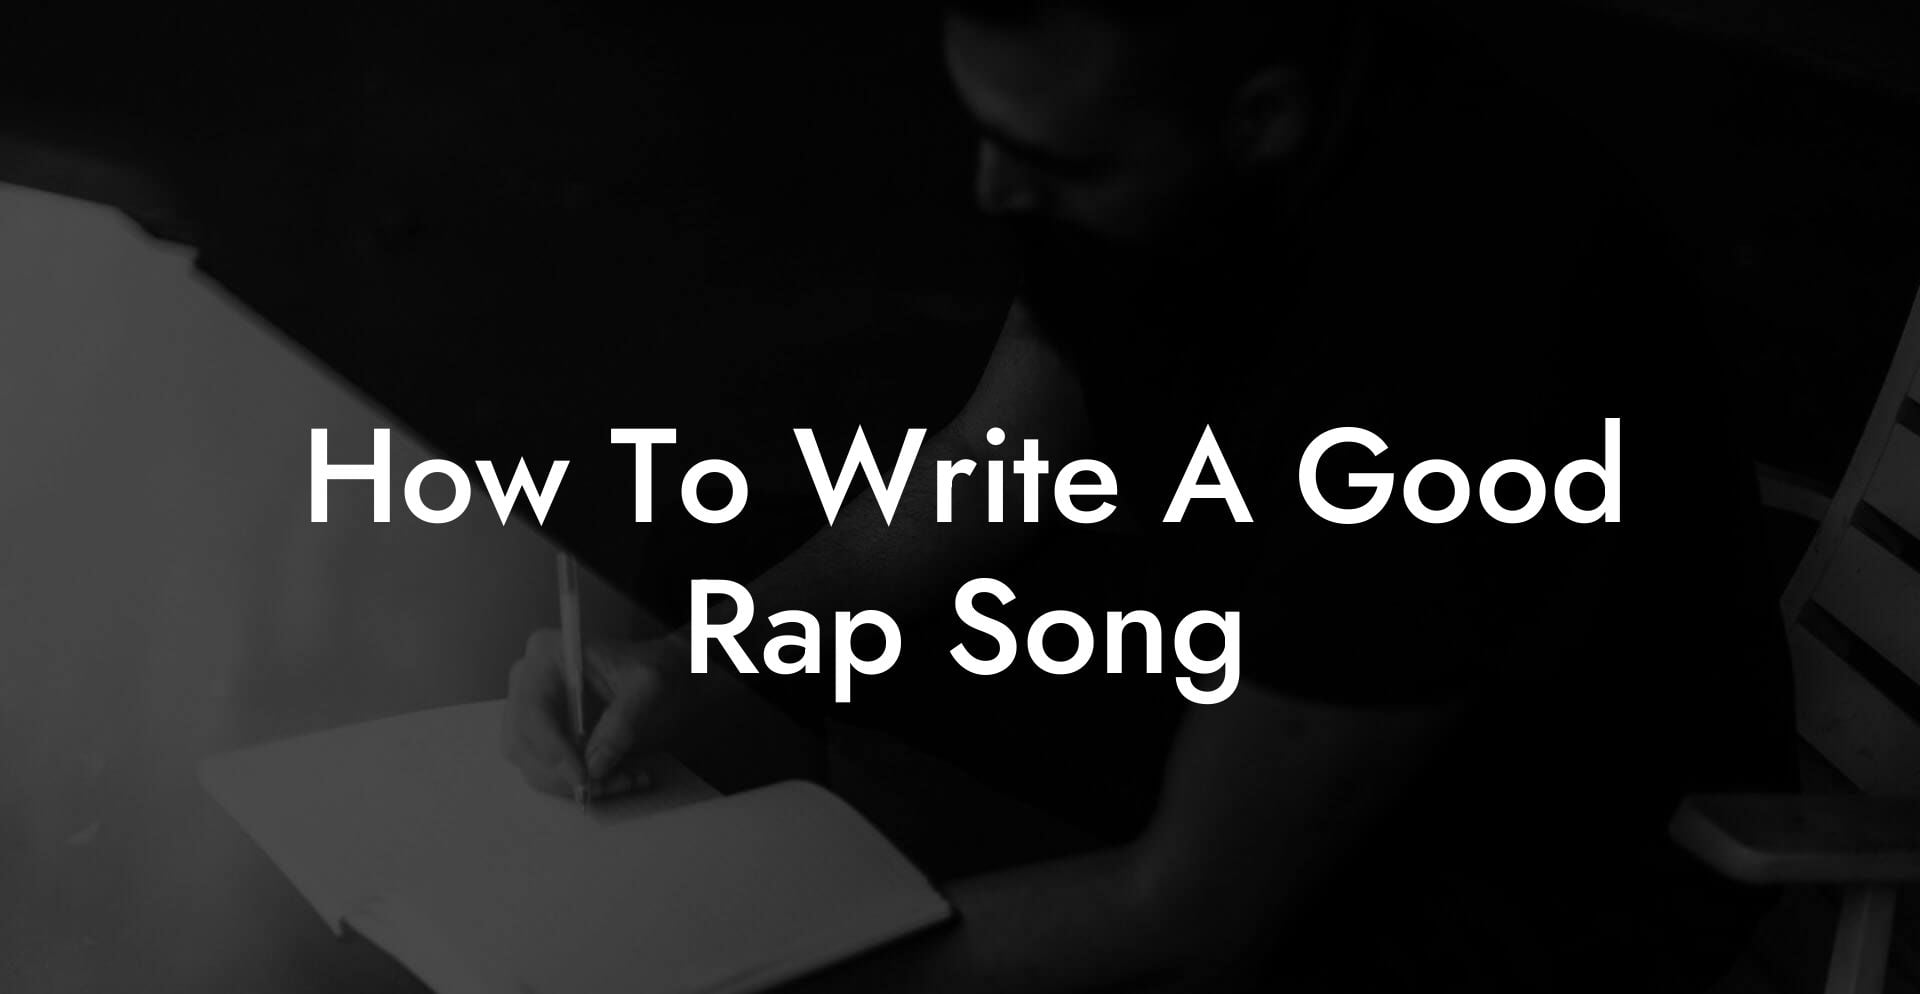 how to write a good rap song lyric assistant